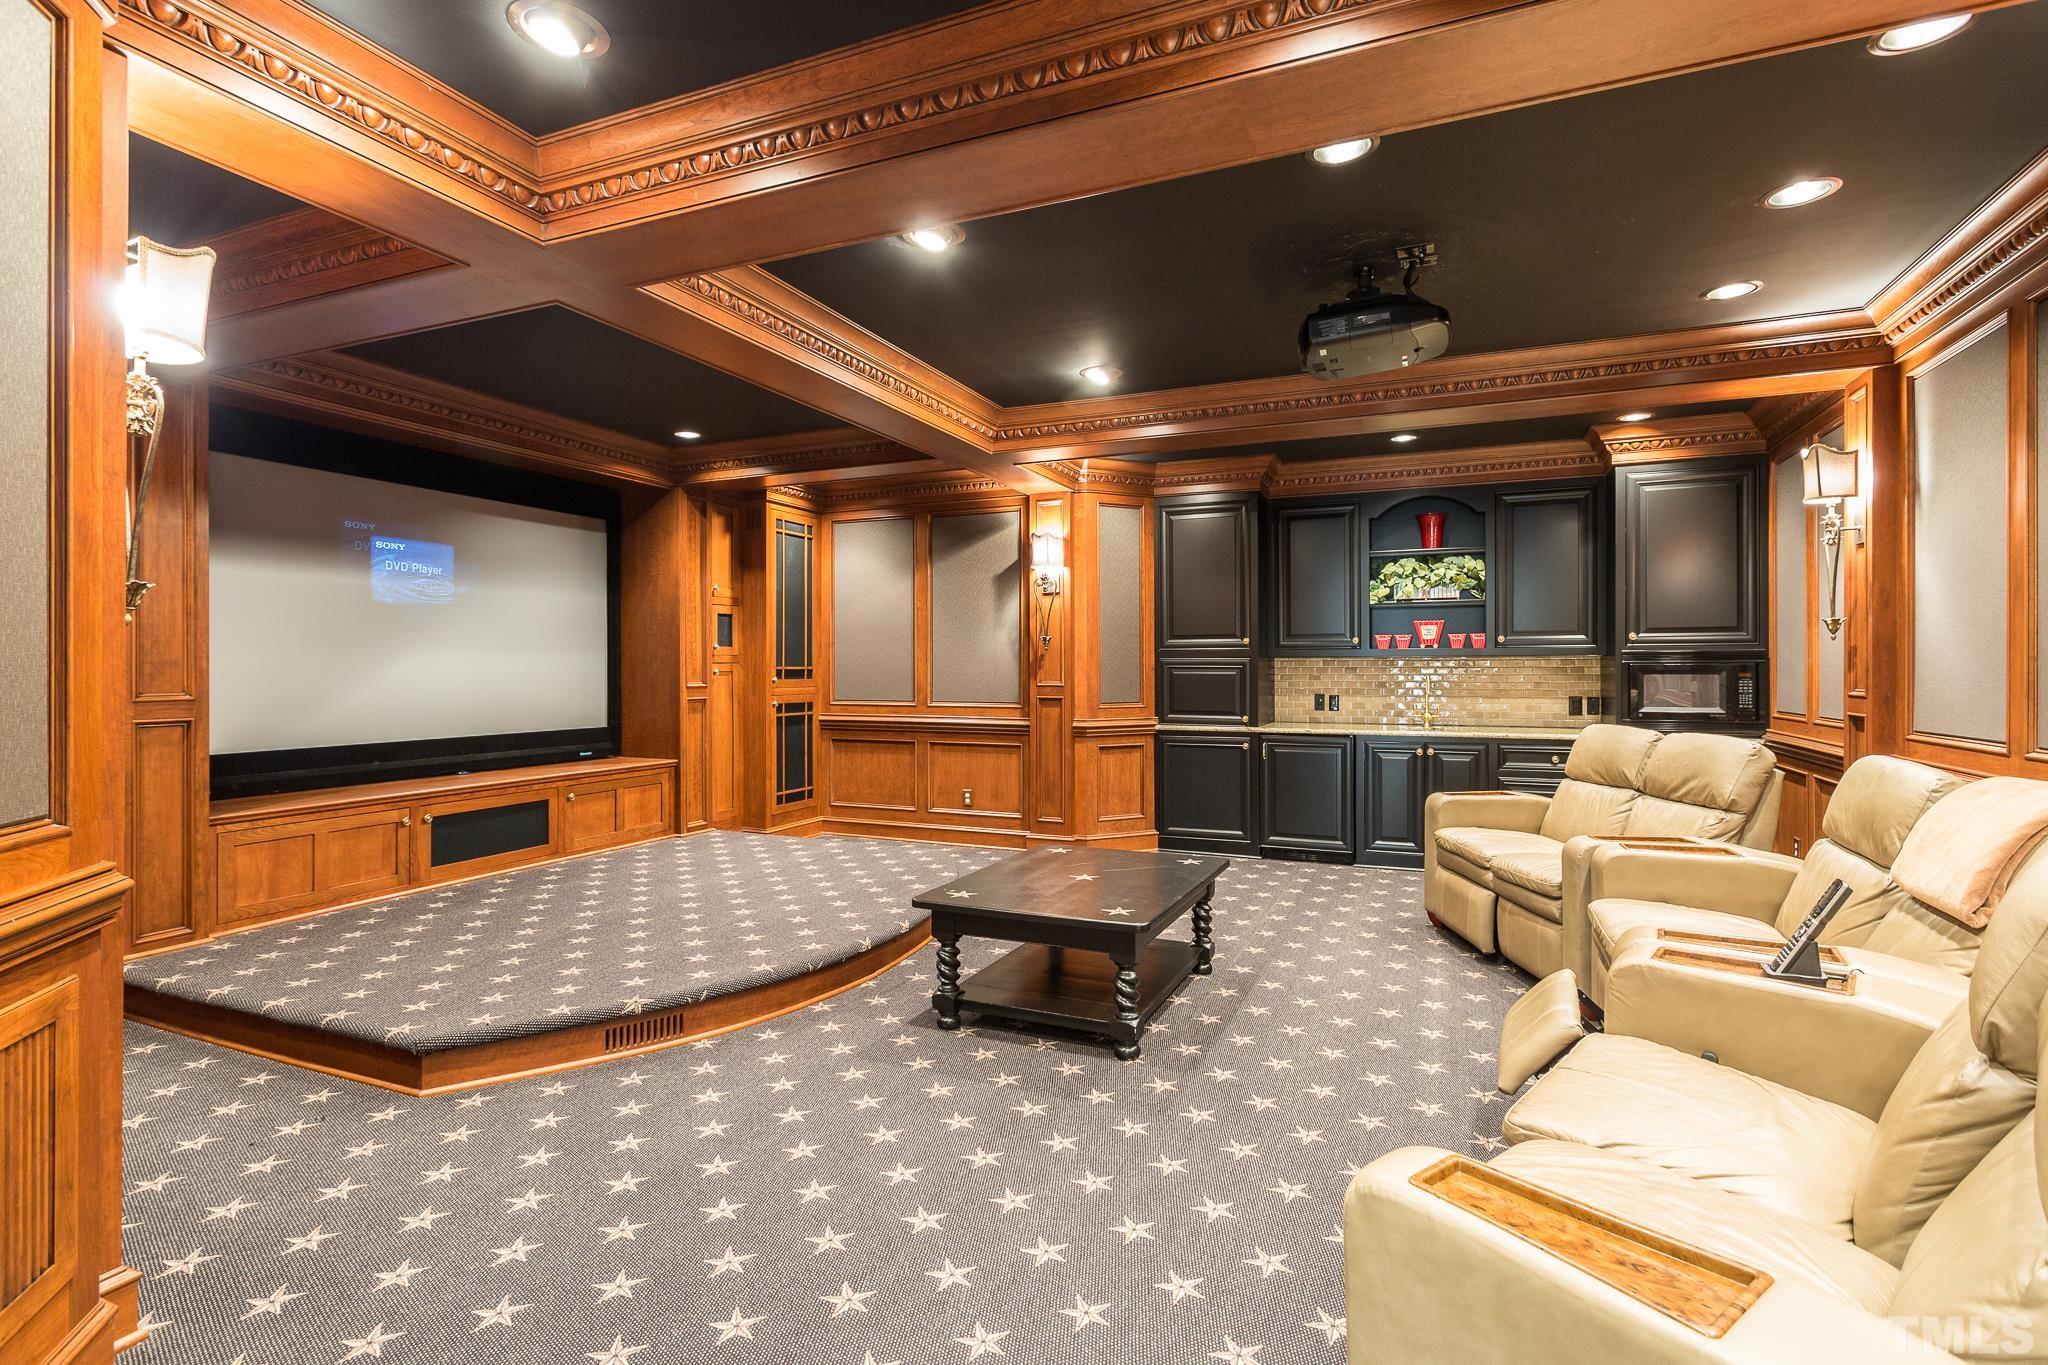 The home theater was part of the 2006 addition.Great care went into its design to include a majestic coffered ceiling. panels for soundproofing, subtle built-in storage for audio-visual components, a built-in home stage, and wet bar w/microwave.